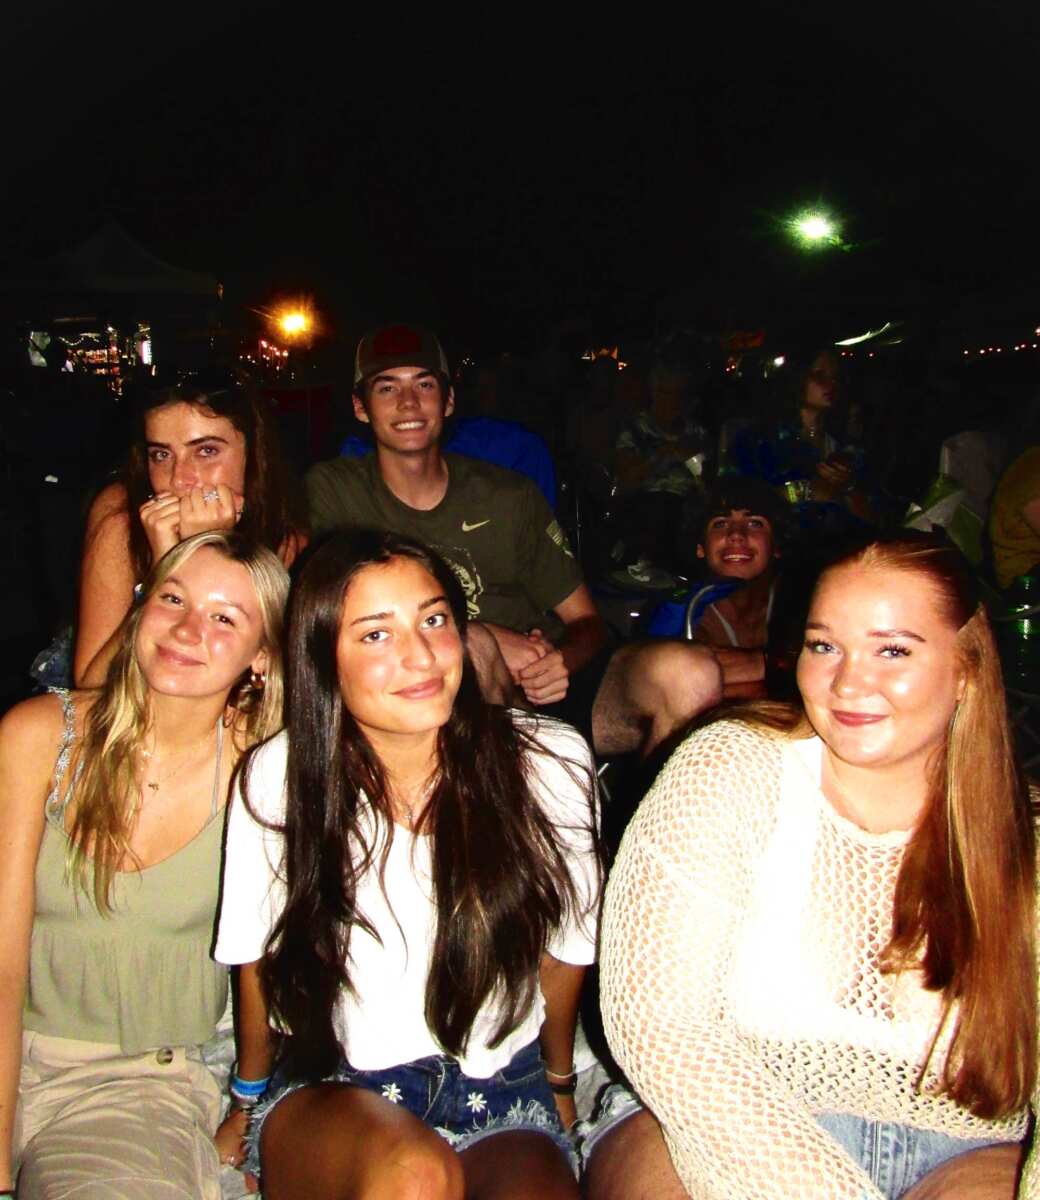 group of teenagers/young adults smiling and posing in outdoor concert setting at nighttime